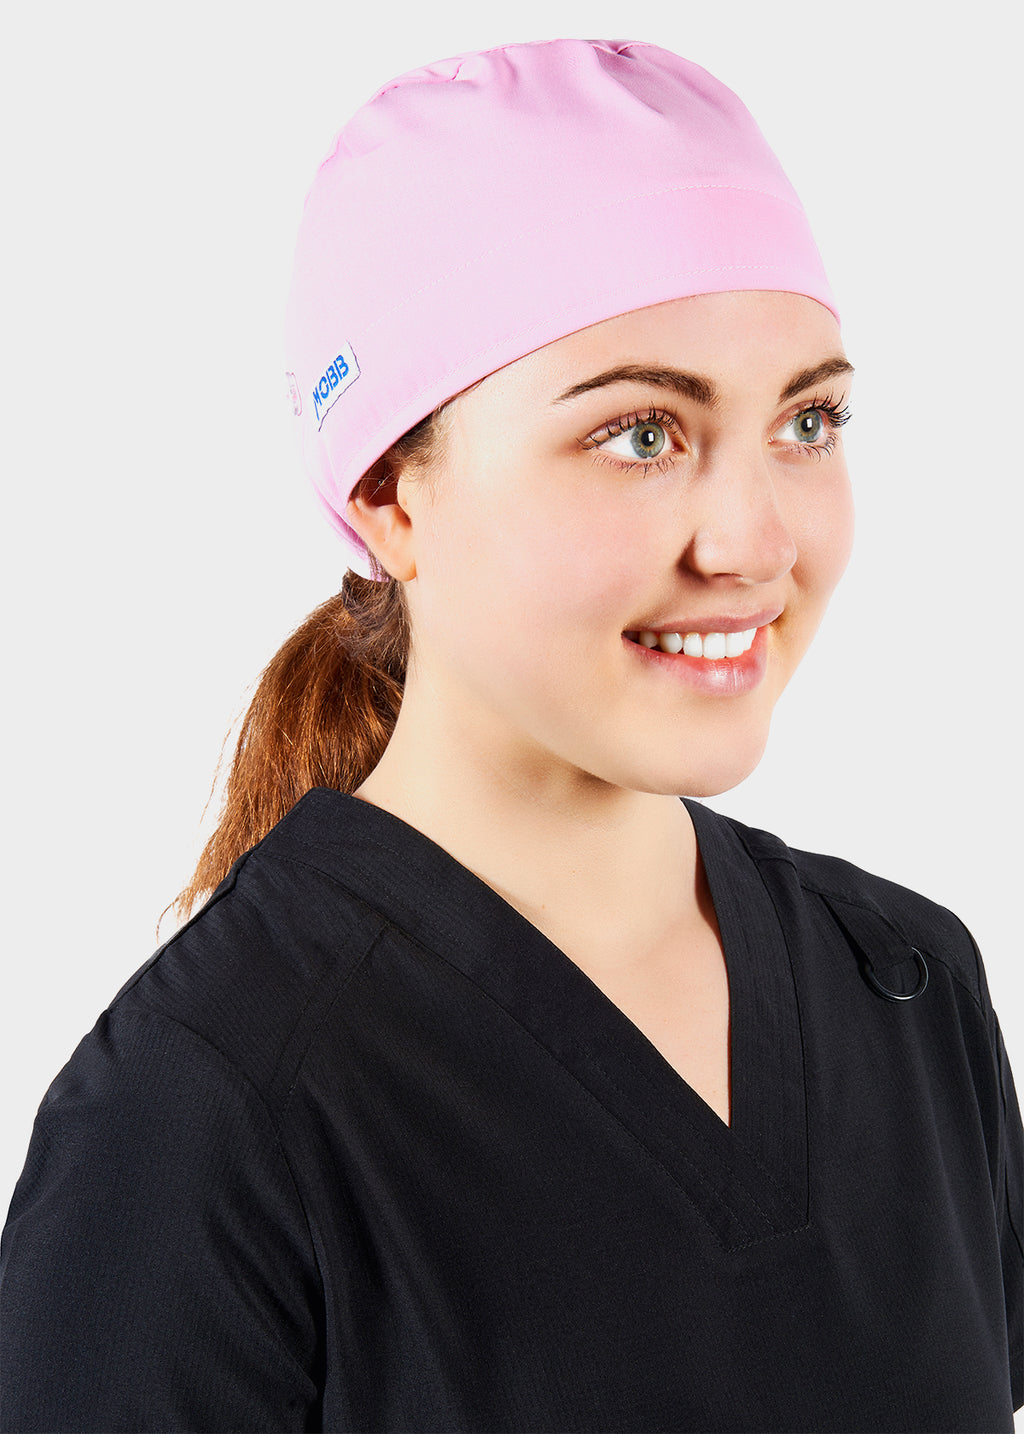 Product - MOBB Unisex Surgeon Cap With Side Buttons